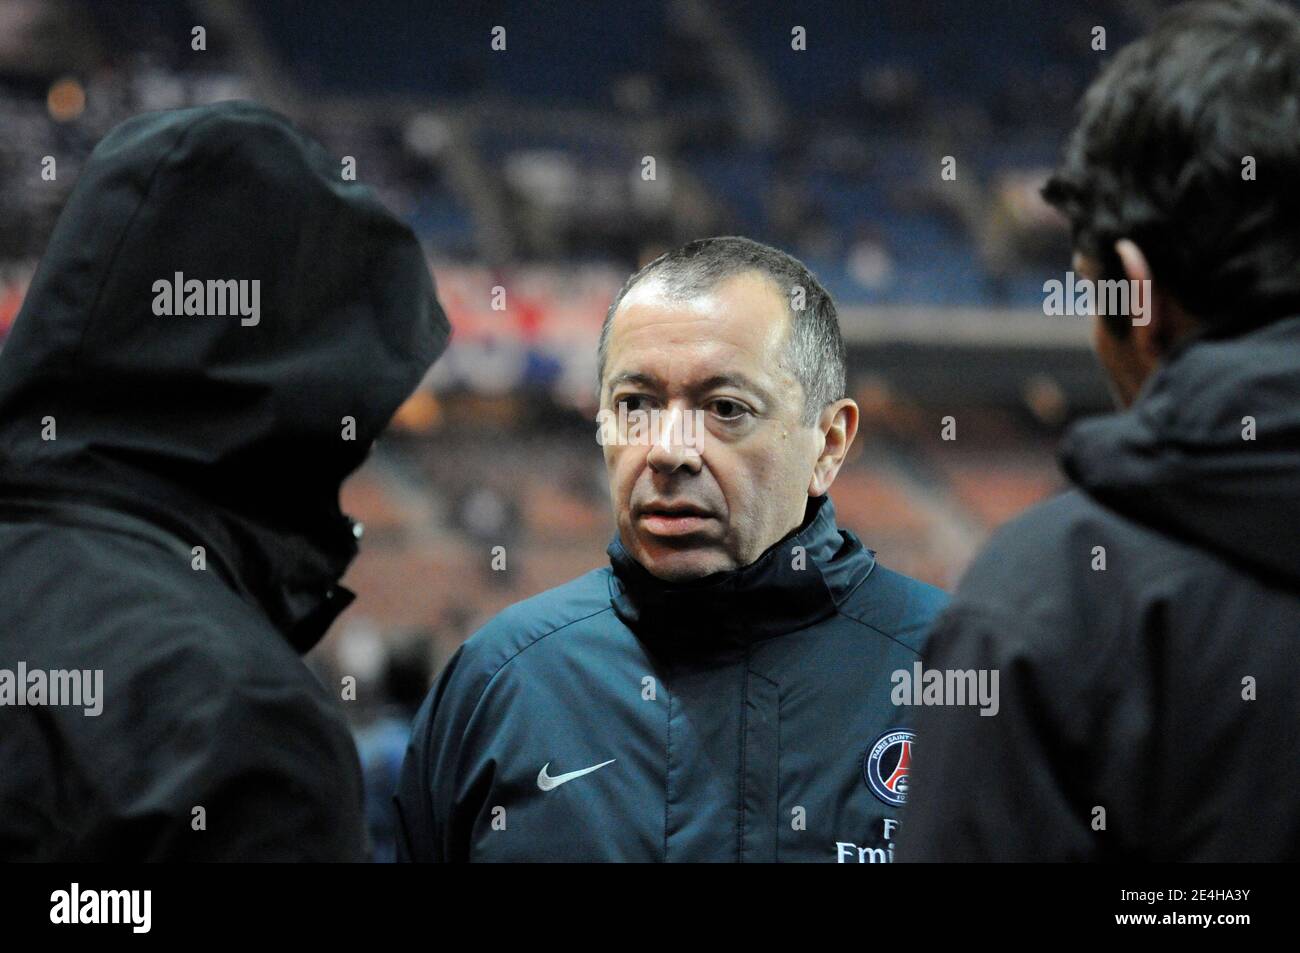 PSG's new president Robin Leproux during the French First League soccer match, Paris Saint-Germain vs RC Lens at Parc des Princes stadium in Paris, France on December 17, 2009. The score ended in a 1-1. Photo by Thierry Plessis/ABACAPRESS.COM Stock Photo